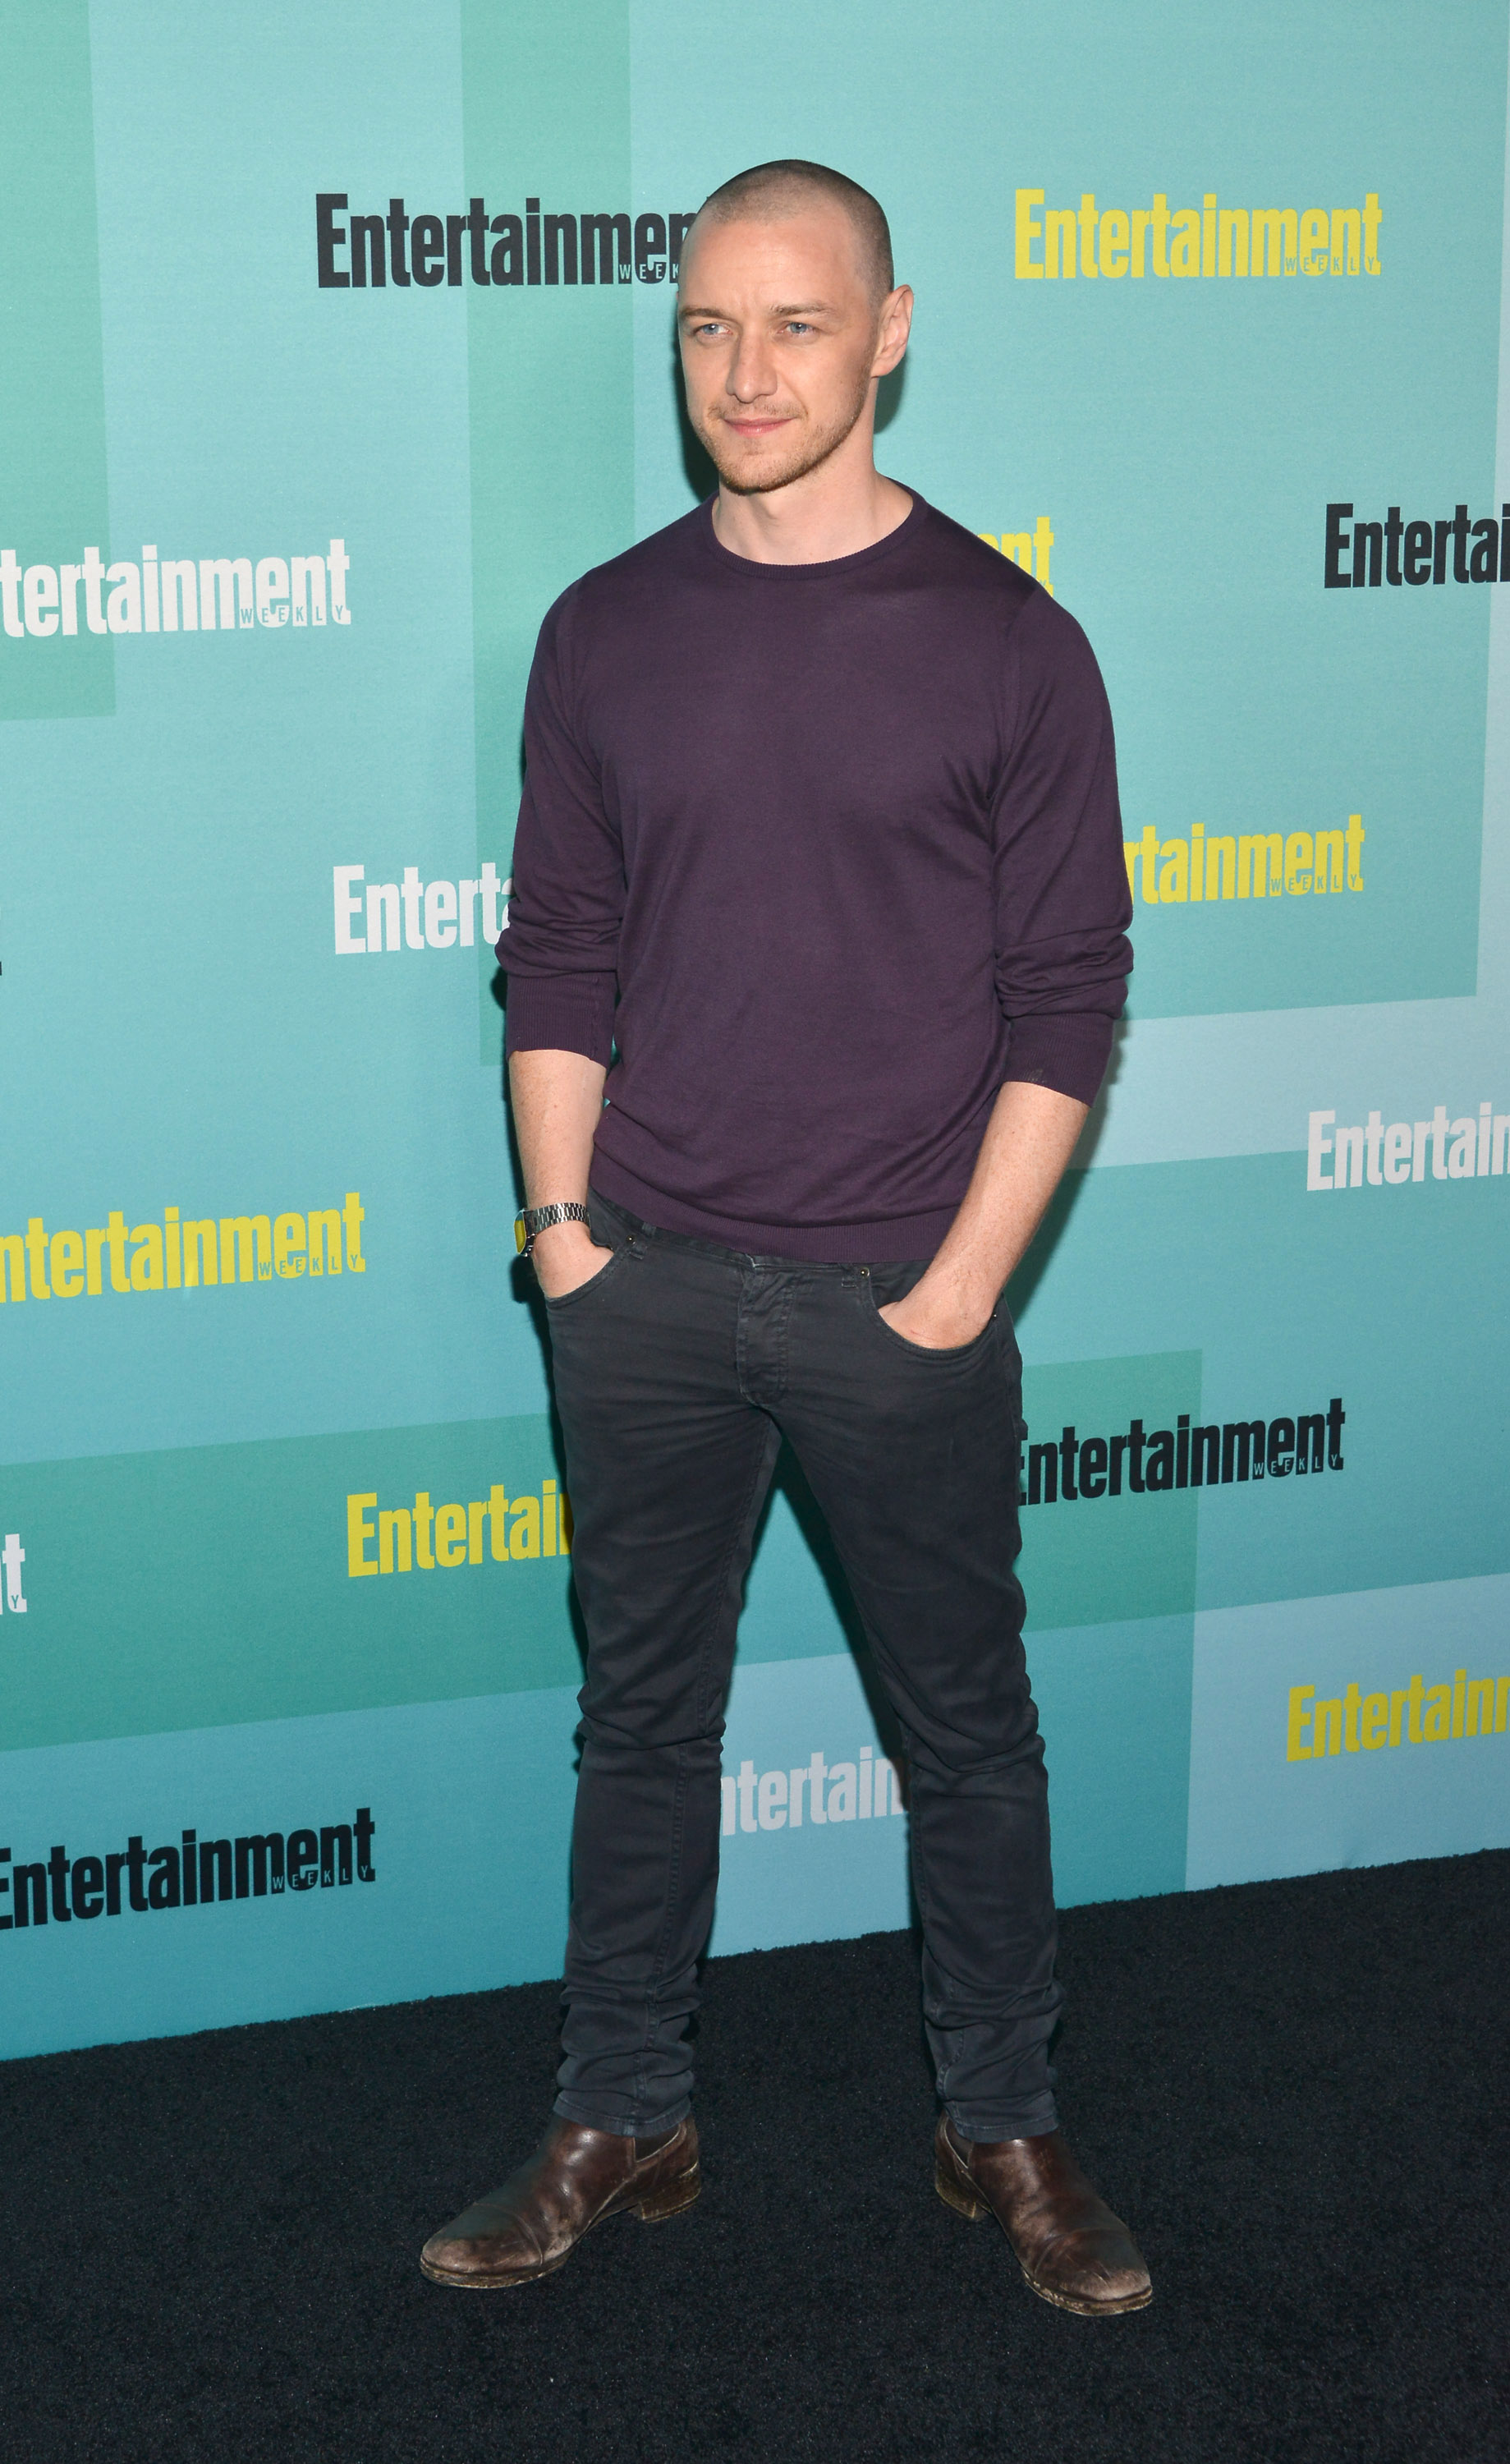 James McAvoy arrives at the Entertainment Weekly celebration at The Hard Rock Hotel in San Diego on July 11, 2015.